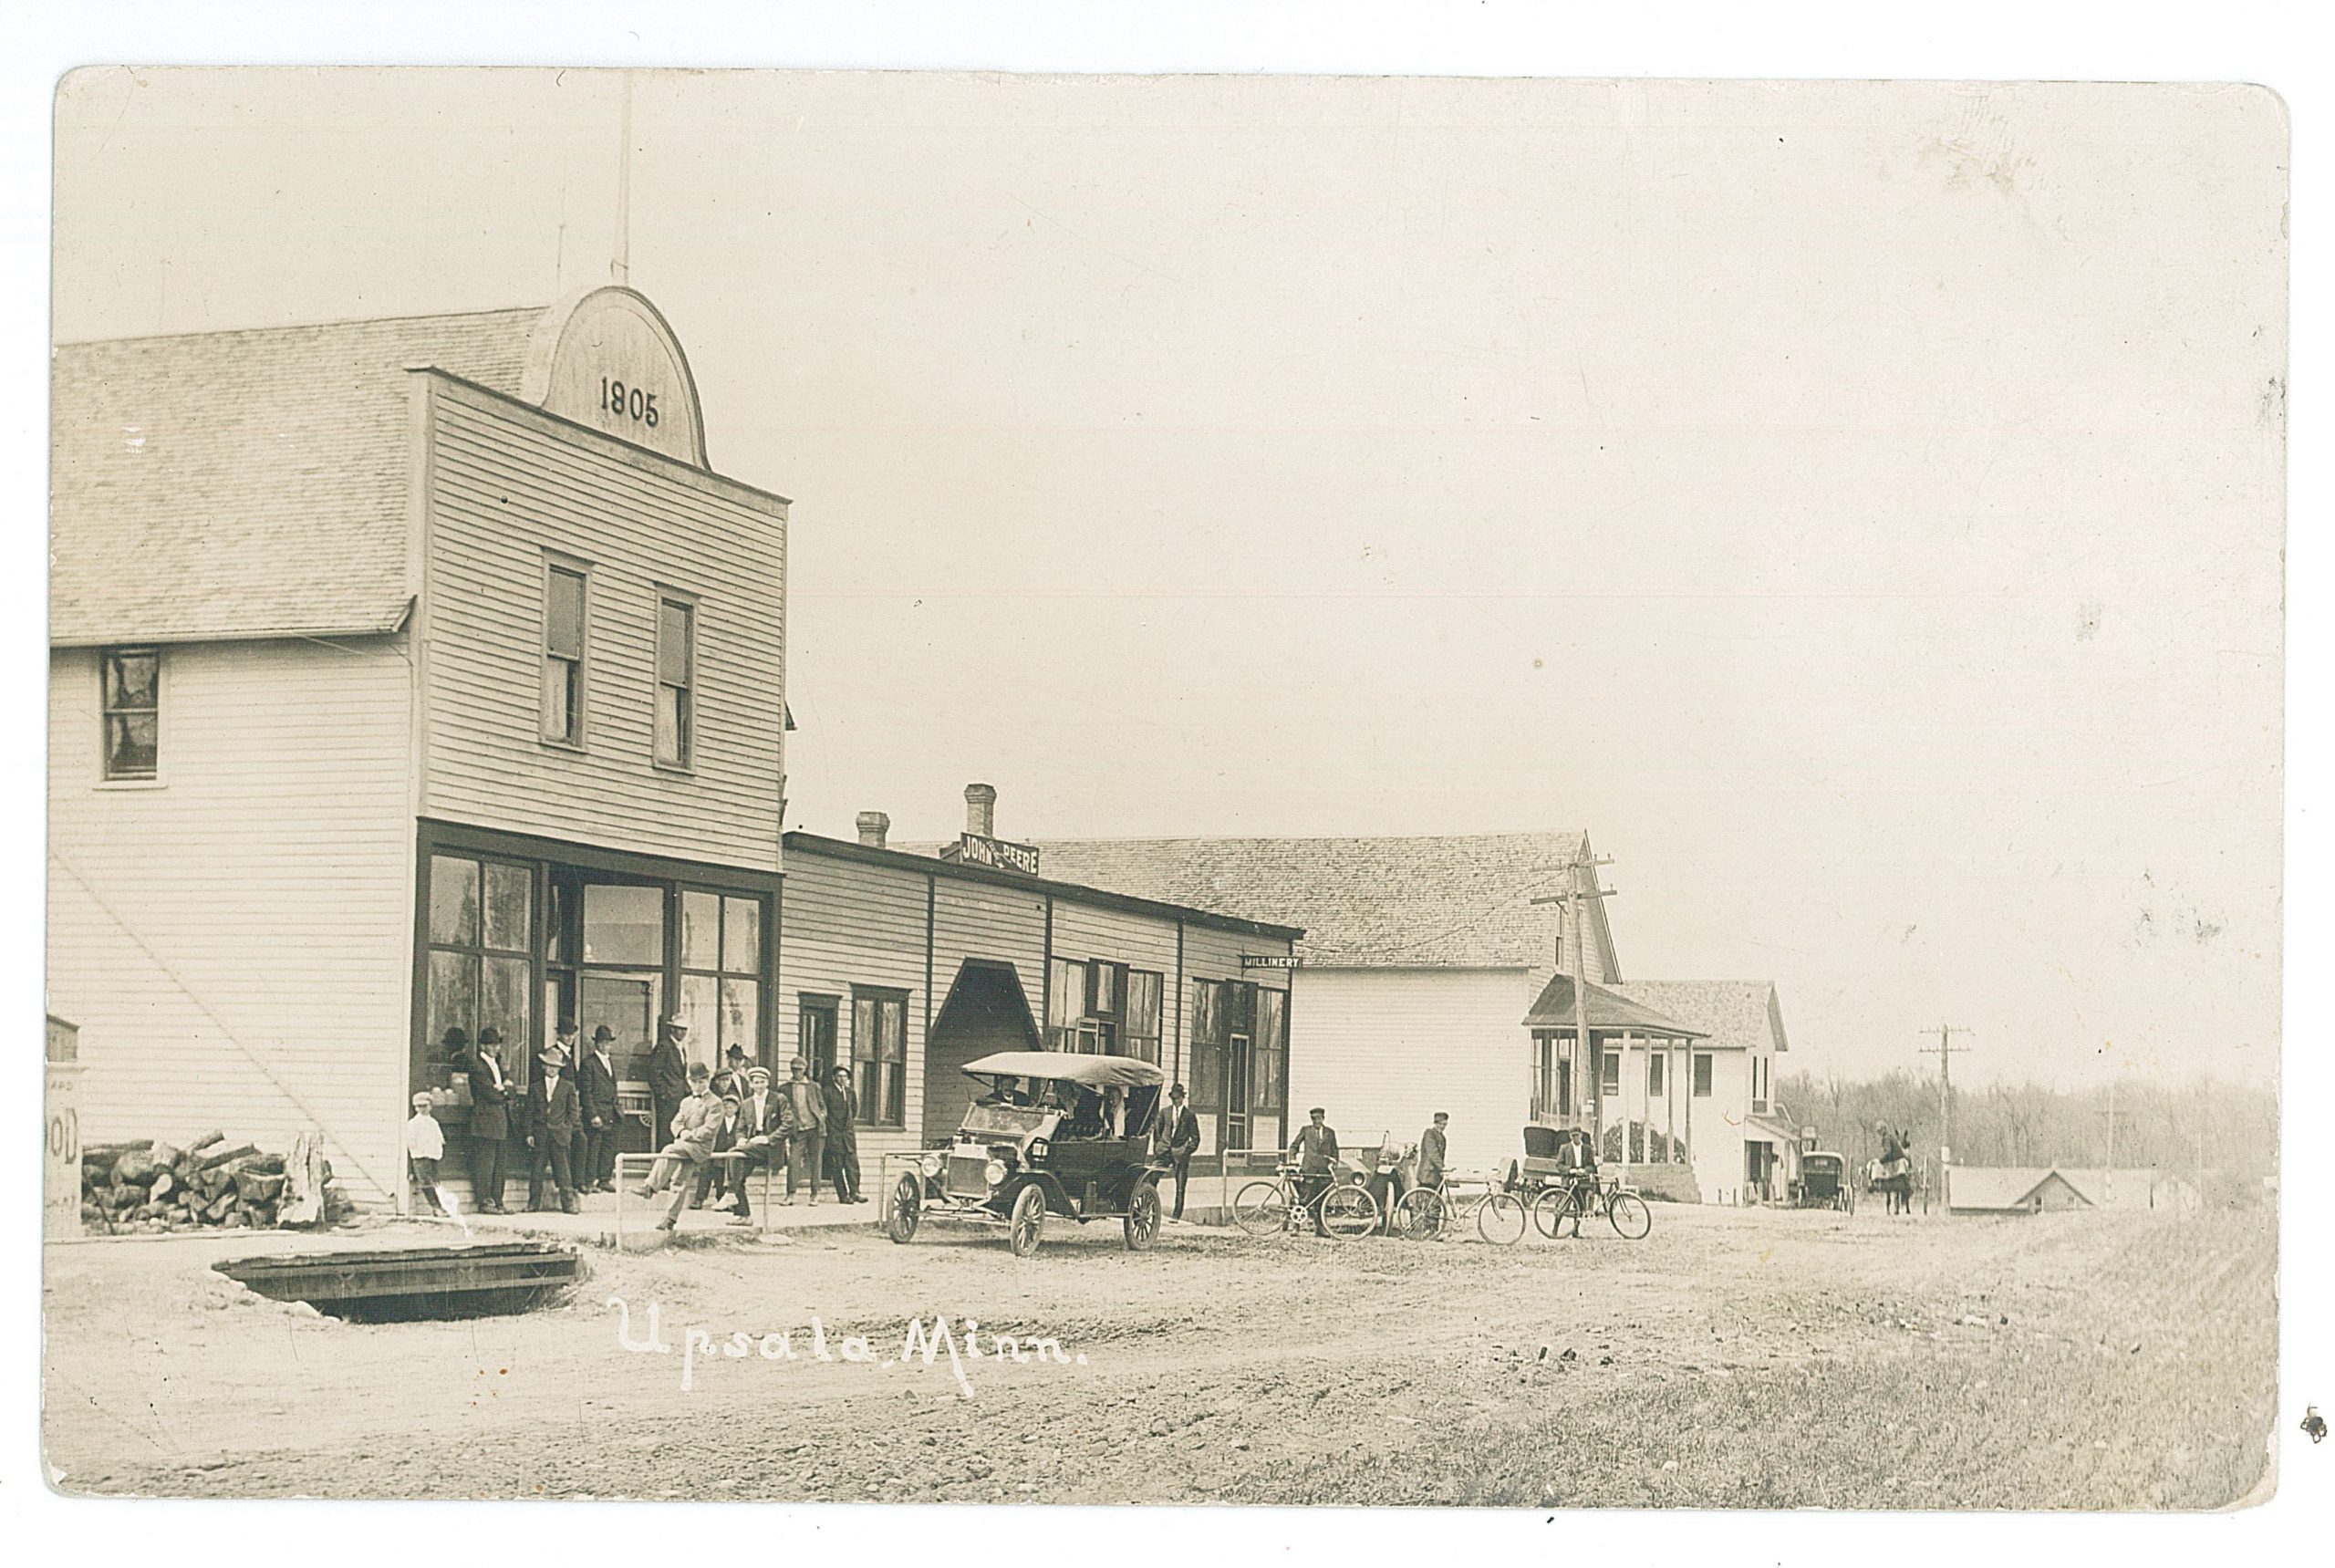 Photo postcard of Main Street in Upsala, Minnesota, c. 1910. Handwritten on the back several businesses are identified, a building built by Upsala Hall Construction Association in 1905 that was purchased by J.S. Borgstrom in 1909, Alfred Pehrson’s groceries, Swedback’s General Store, and a blacksmith shop that burned down later. Donated to MCHS collections by Bill Morgan.